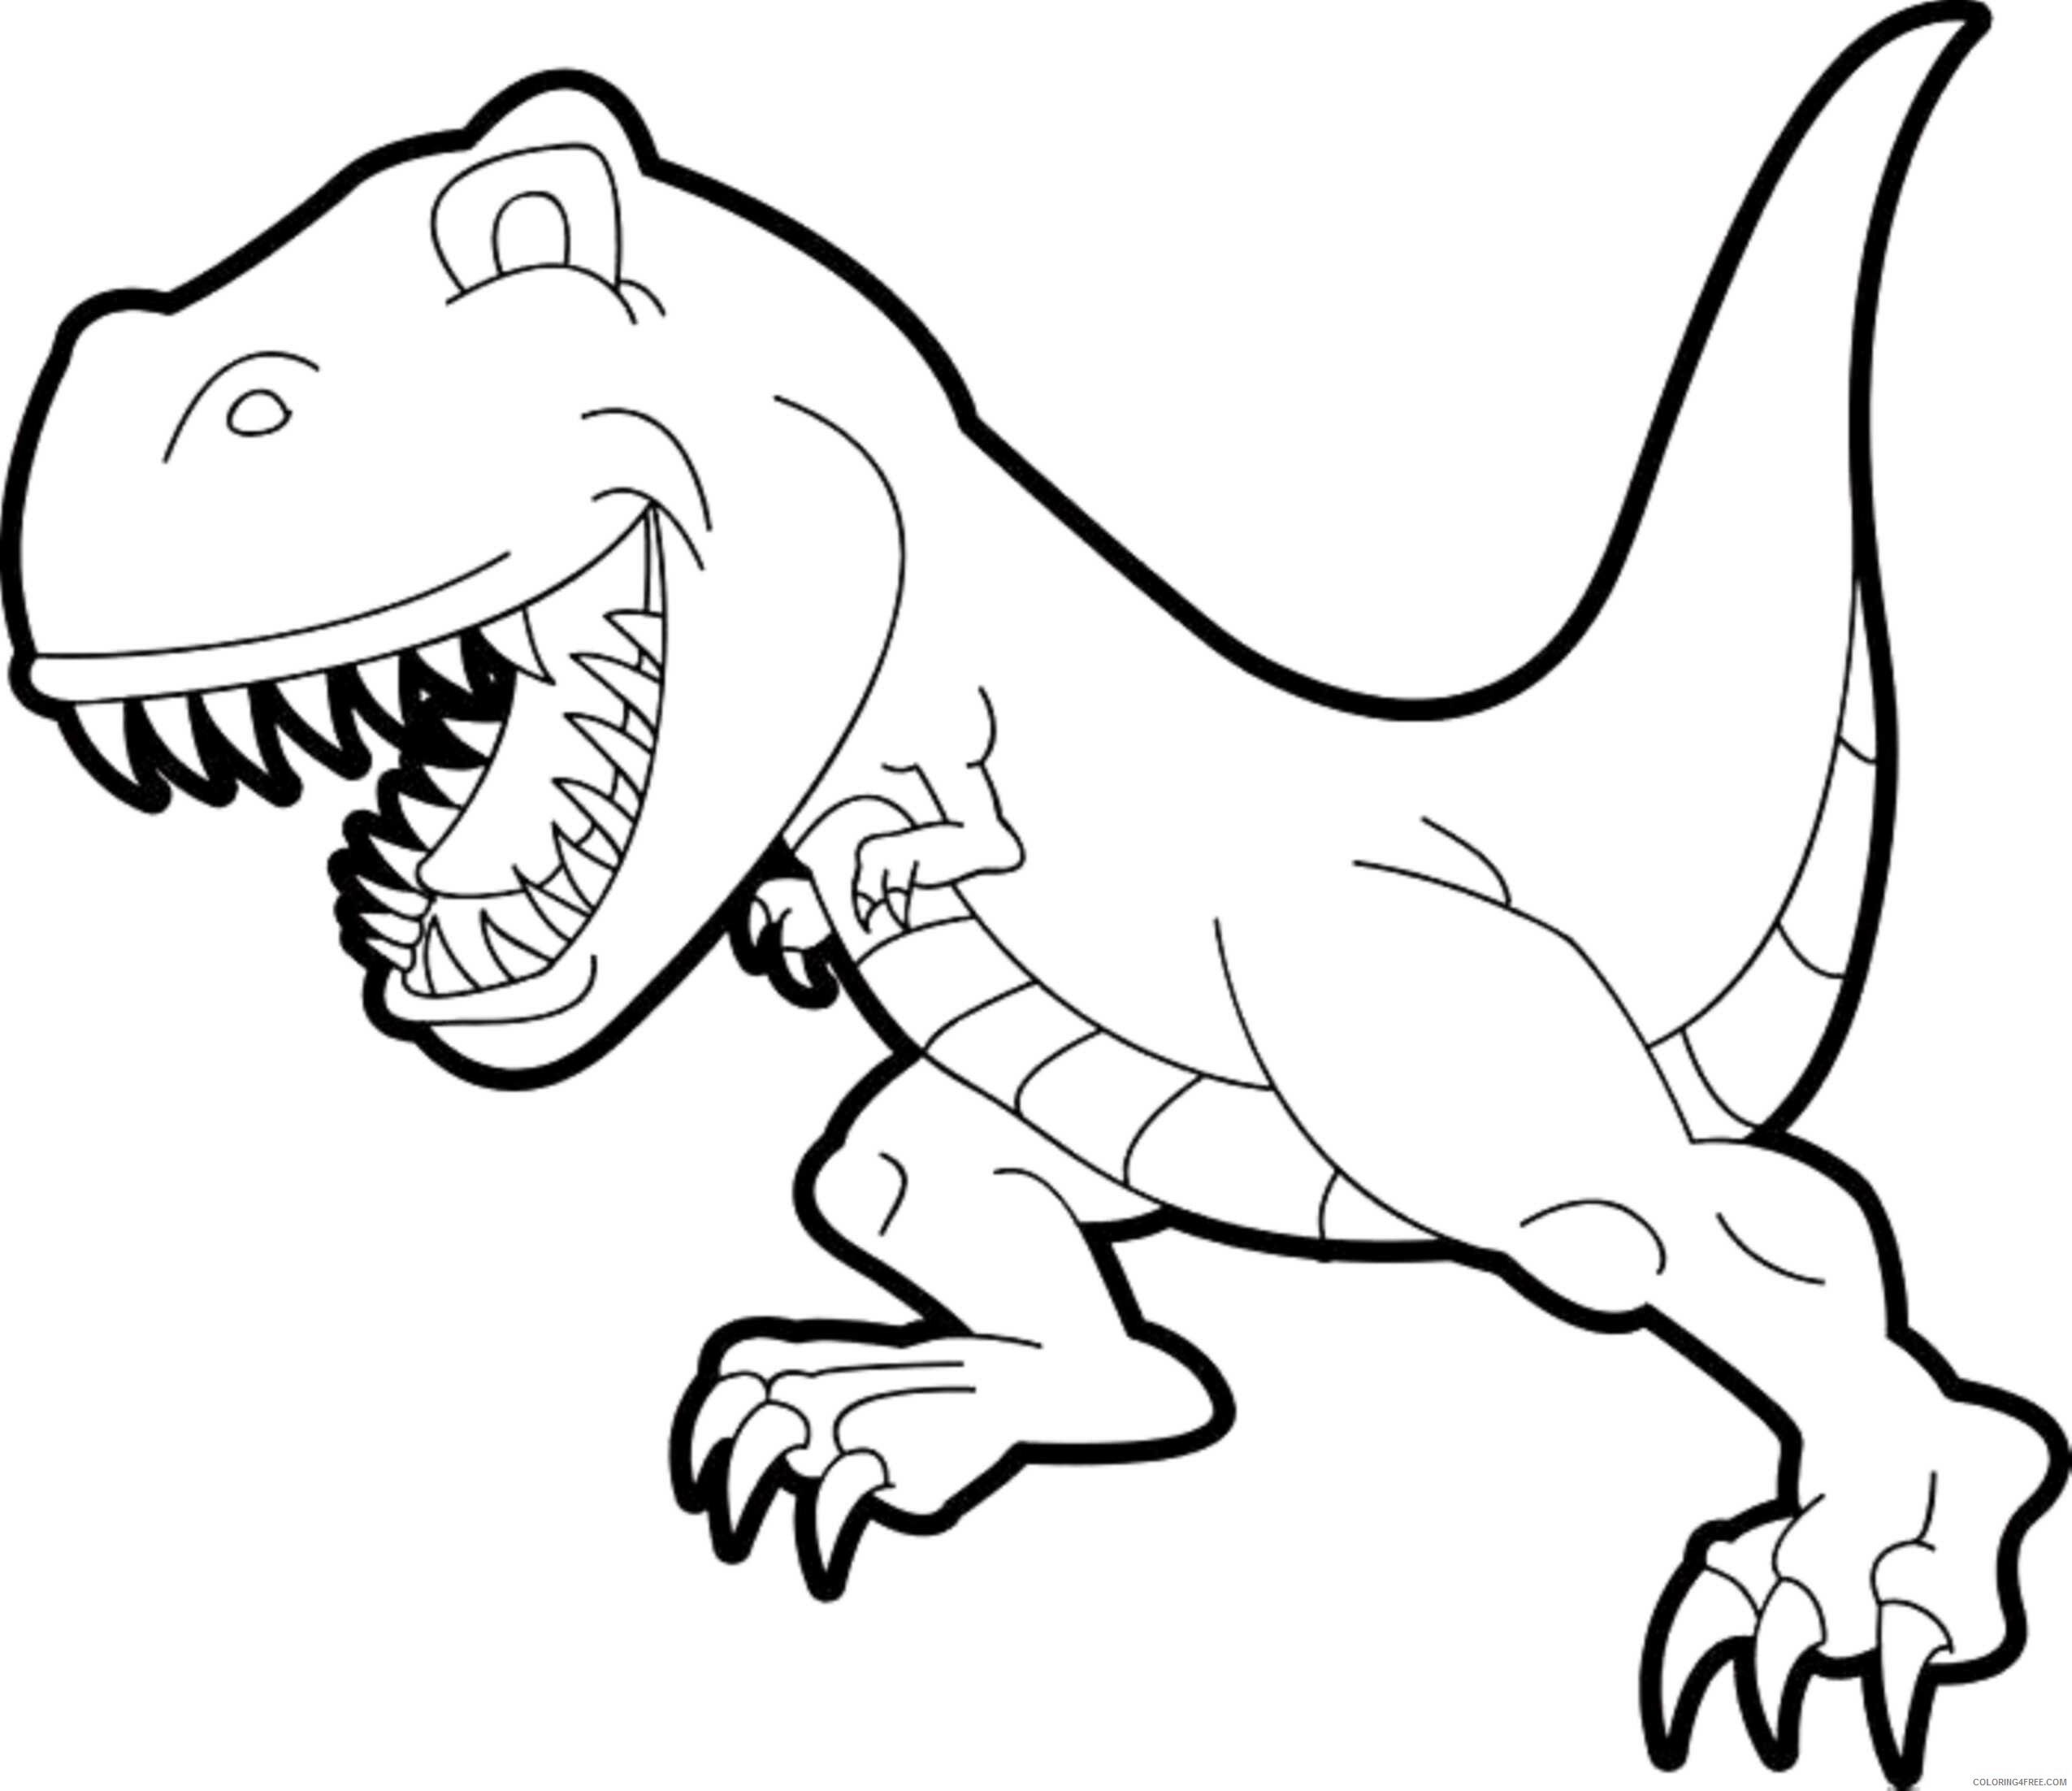 Dinosaurs Coloring Pages for boys t rex drawing simple best Printable 2020 0338 Coloring4free